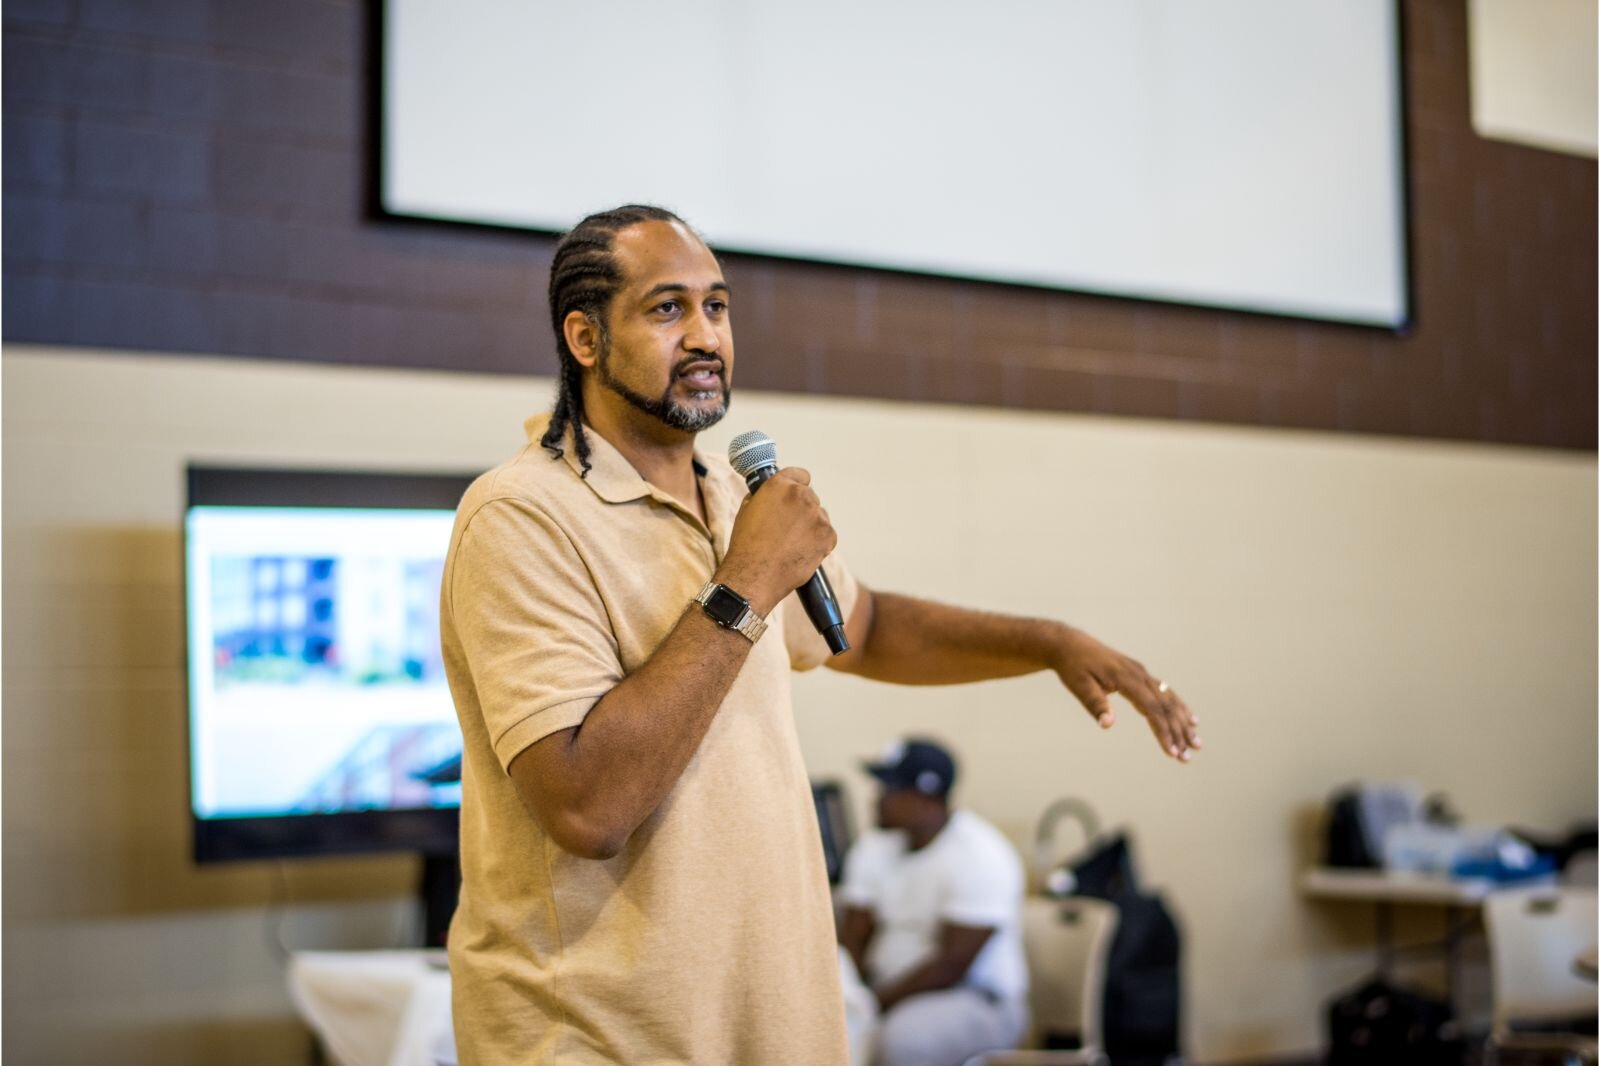 Hayward Babineaux, an architectural associate with Byce & Associates, talks about the Mt. Zion affordable senior housing project at a July 21, 2022 gathering at the church.